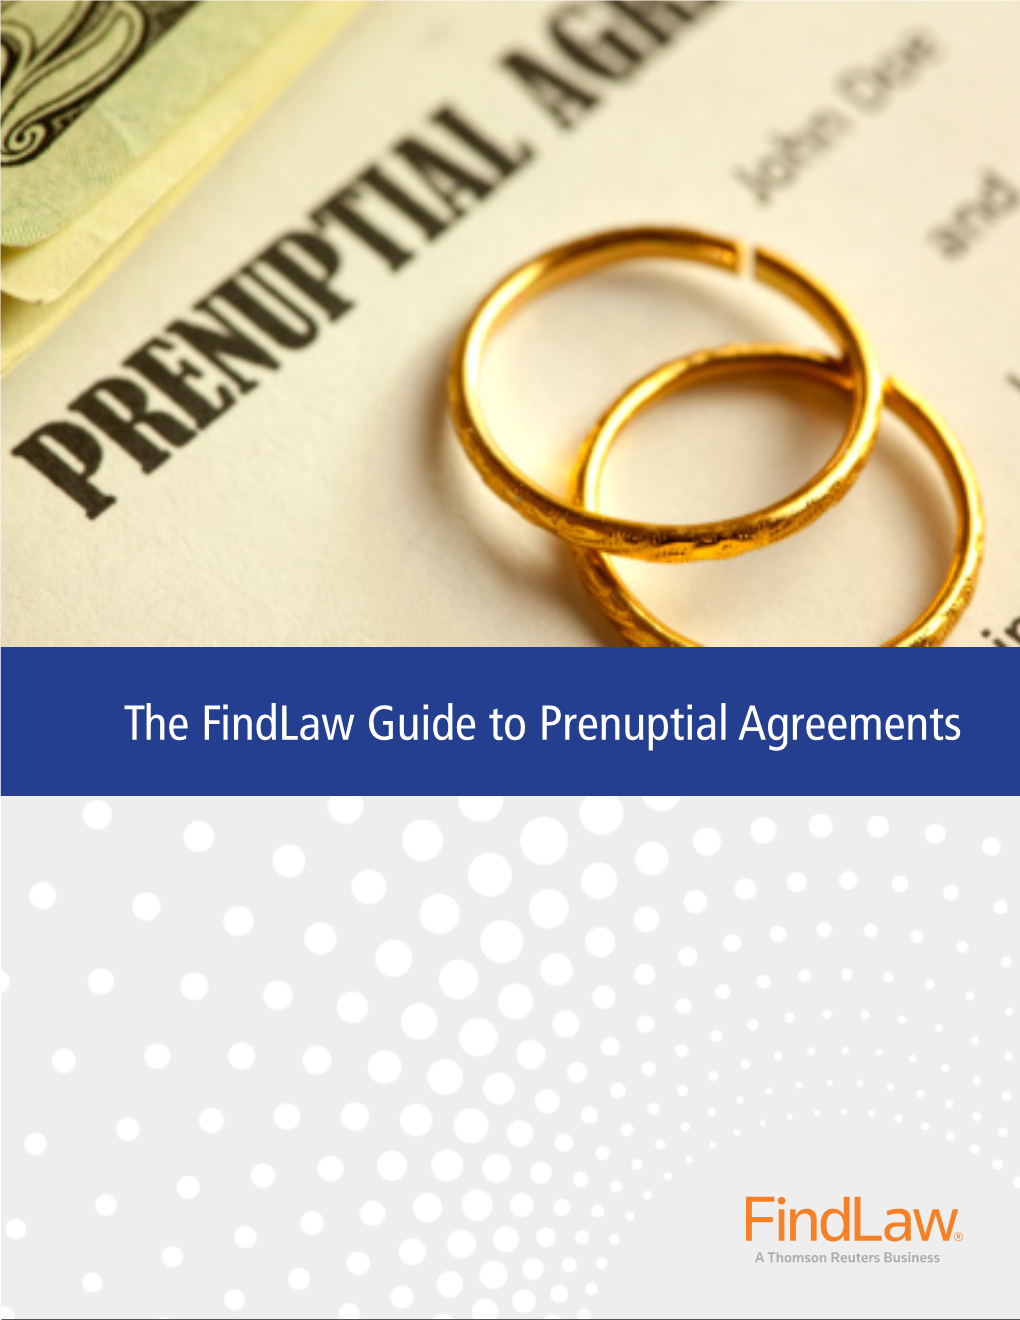 The Findlaw Guide to Prenuptial Agreements